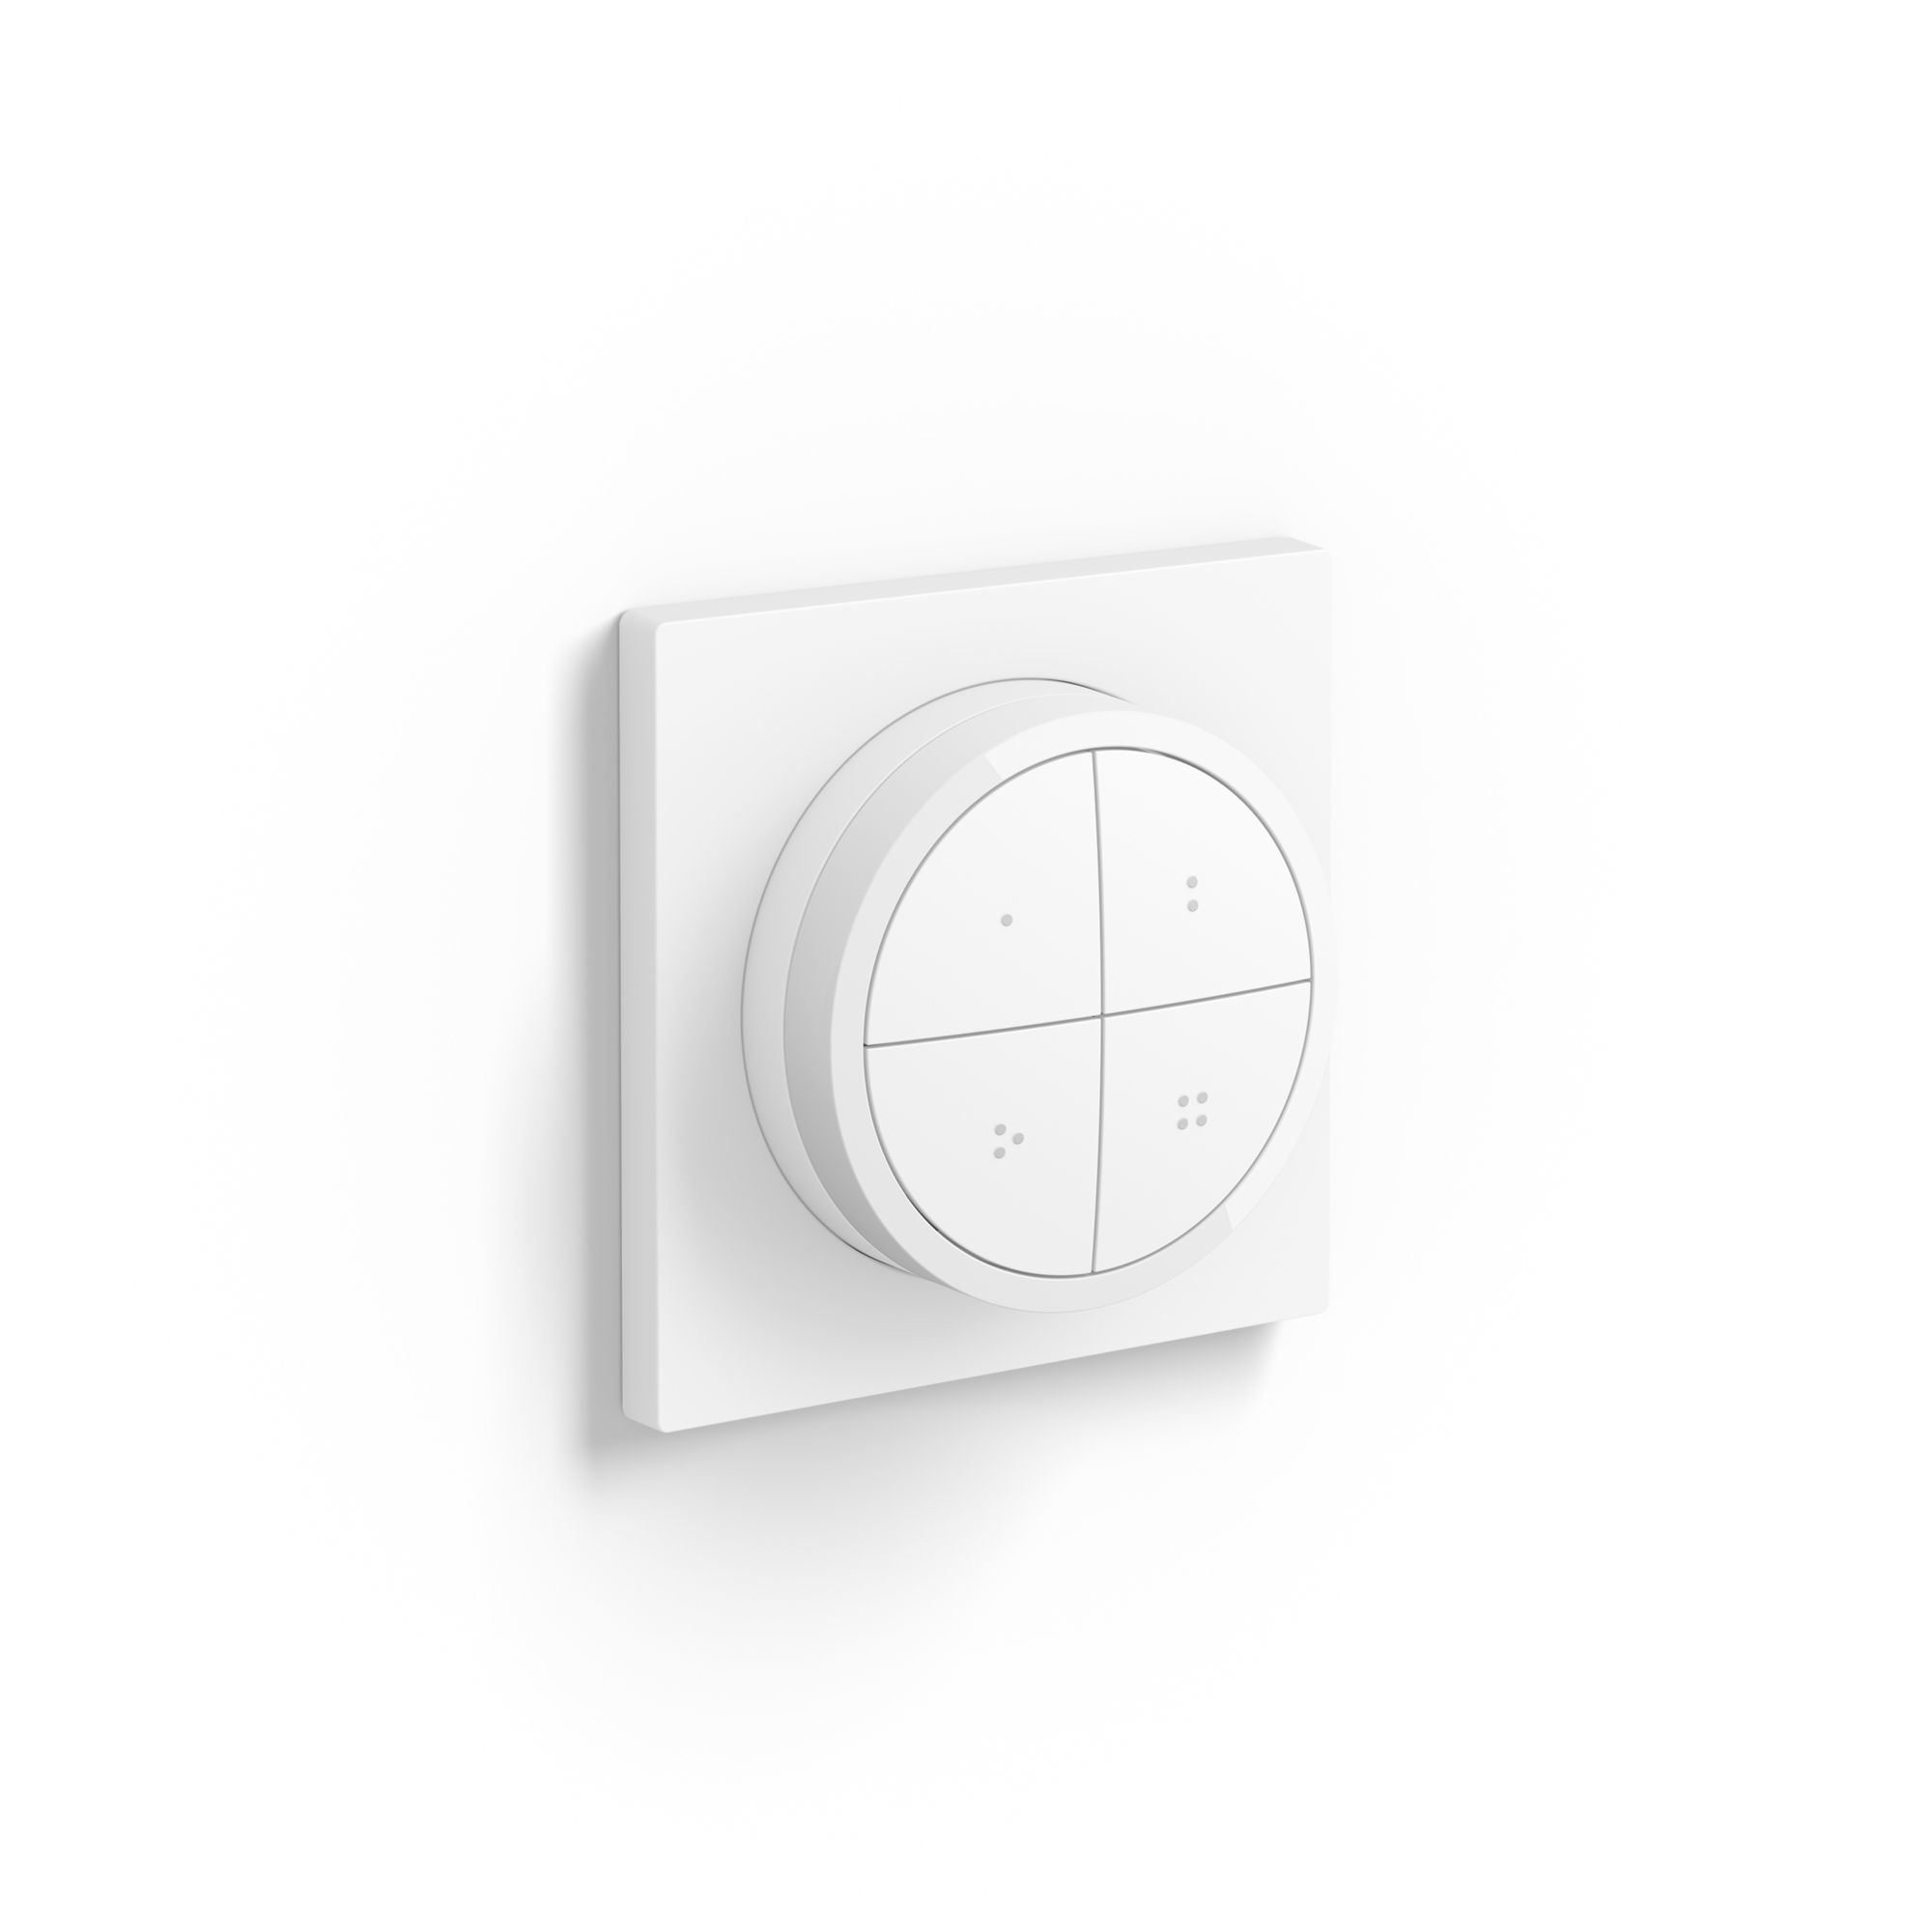 Philips by Signify Tap dial switch